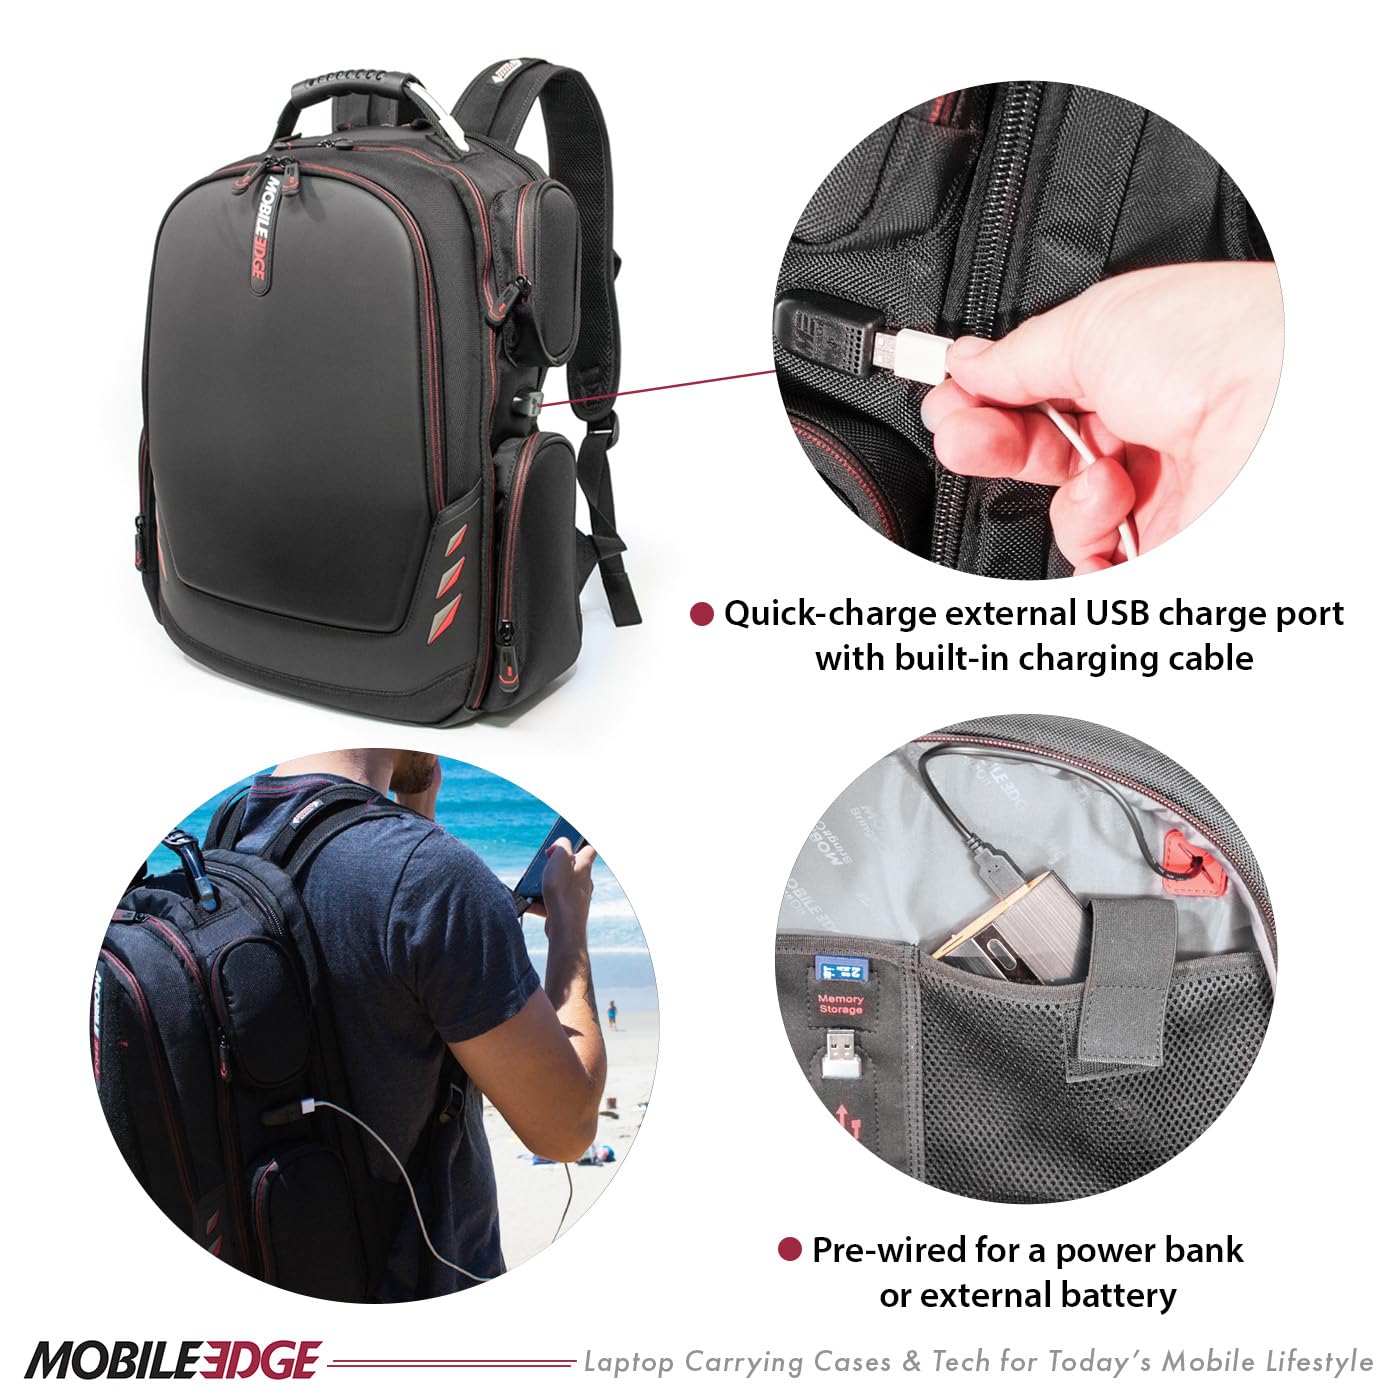 Mobile Edge Core Gaming Laptop Backpack, Molded Front Panel, 17 - 18 Inch, External USB 3.0 Quick-Charge Port and Built-in Charging Cable ScanFast TSA Checkpoint Friendly Black w/Red Trim MECGBP1